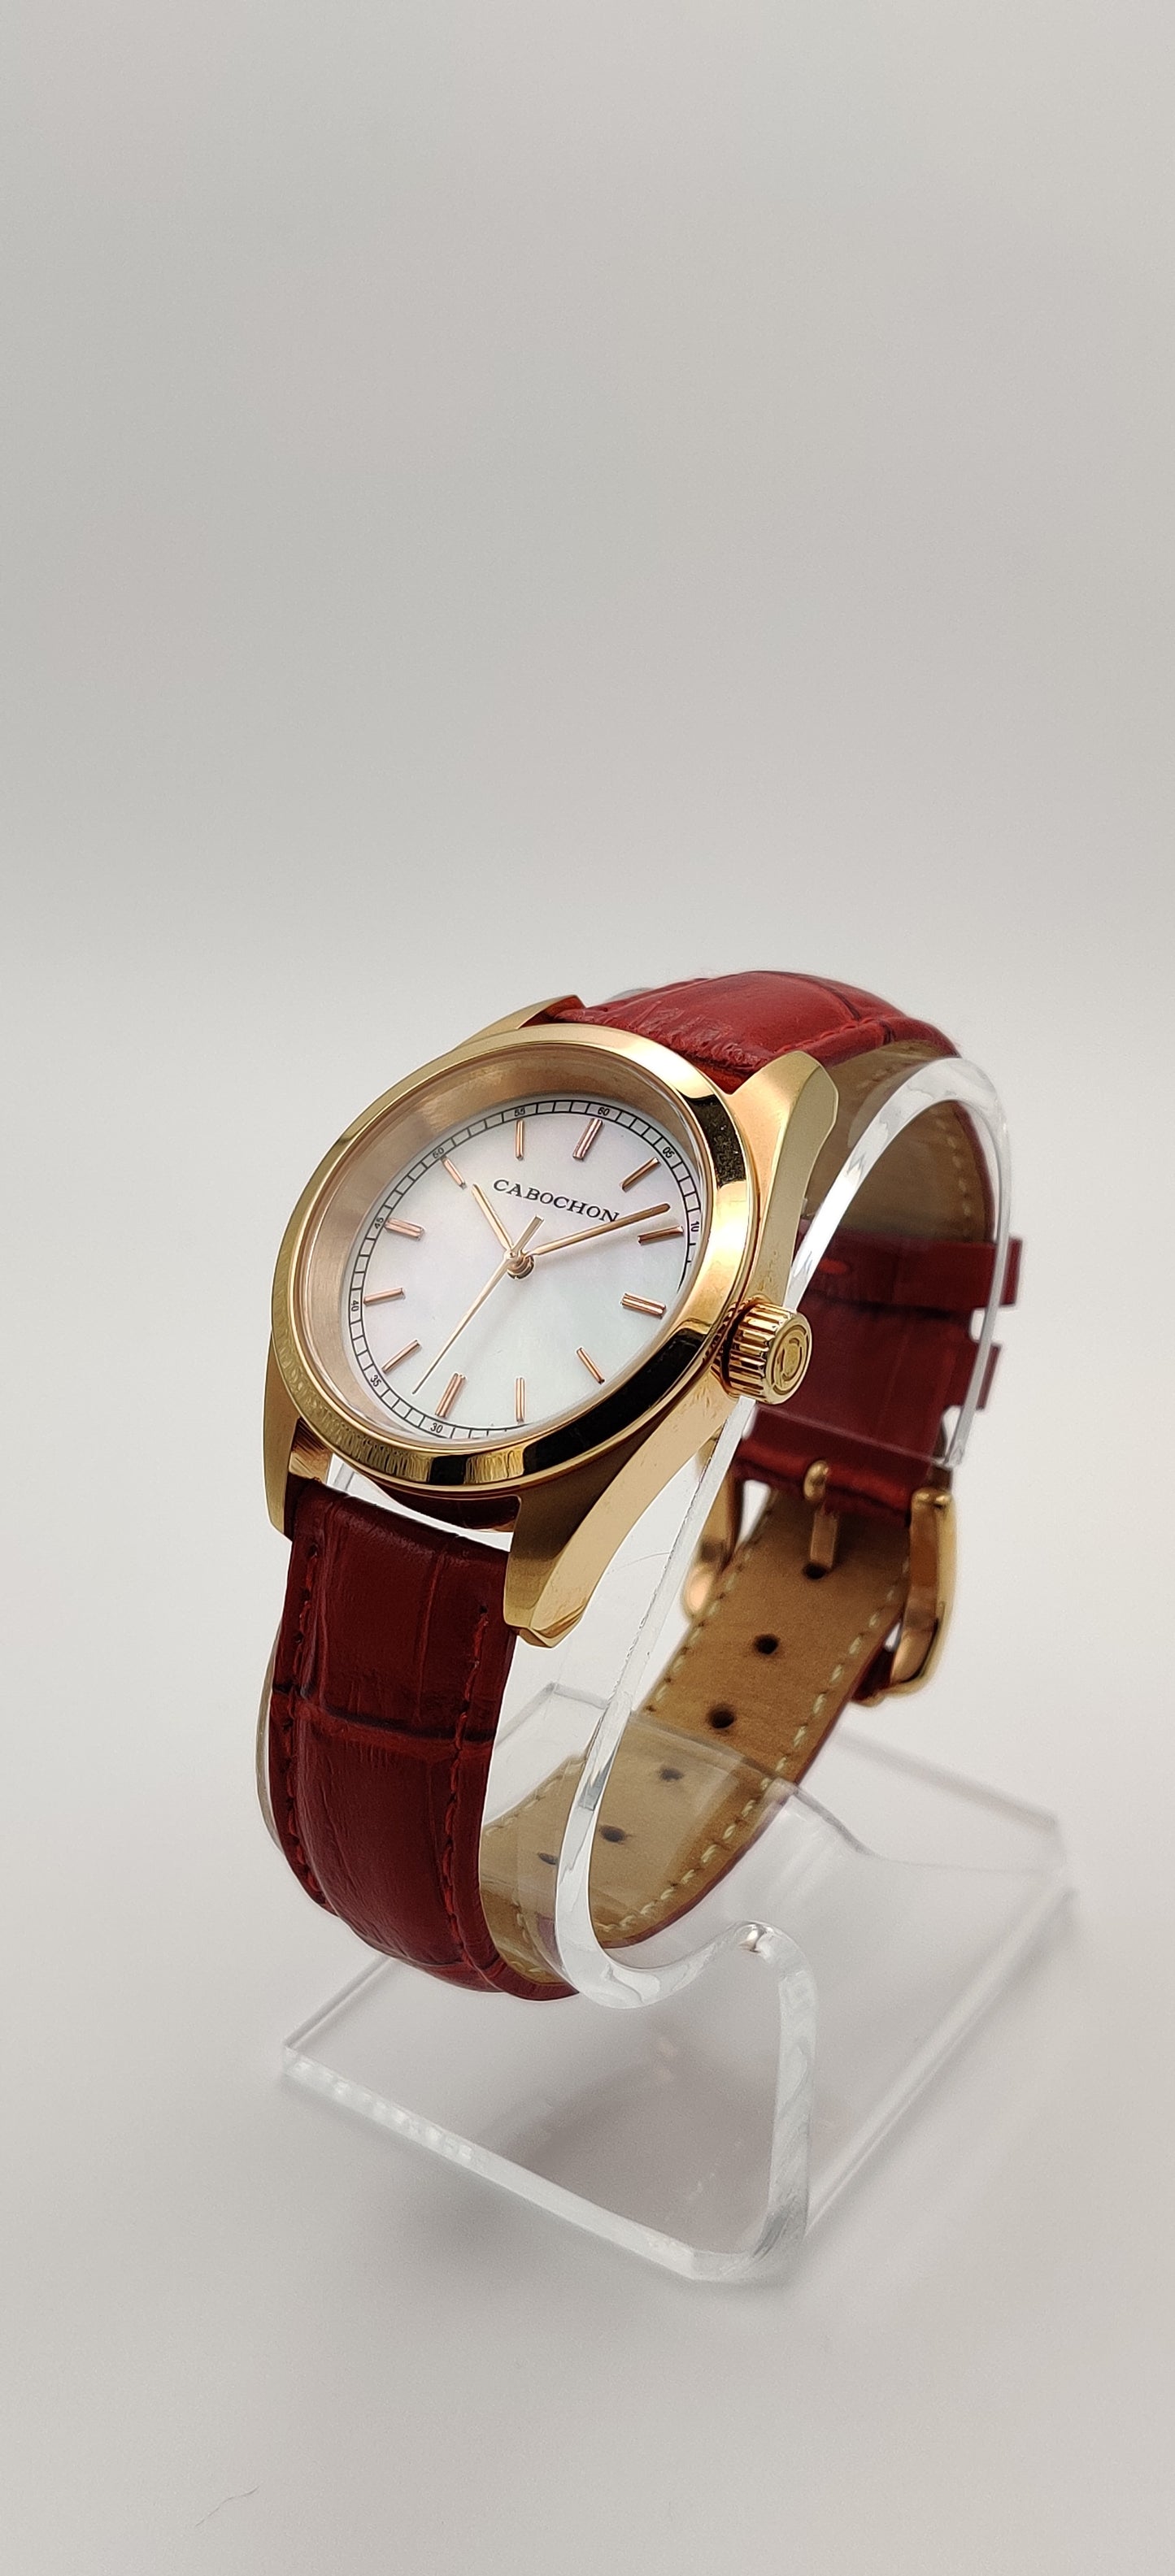 Cabochon Swiss Red Leather Women's Watch